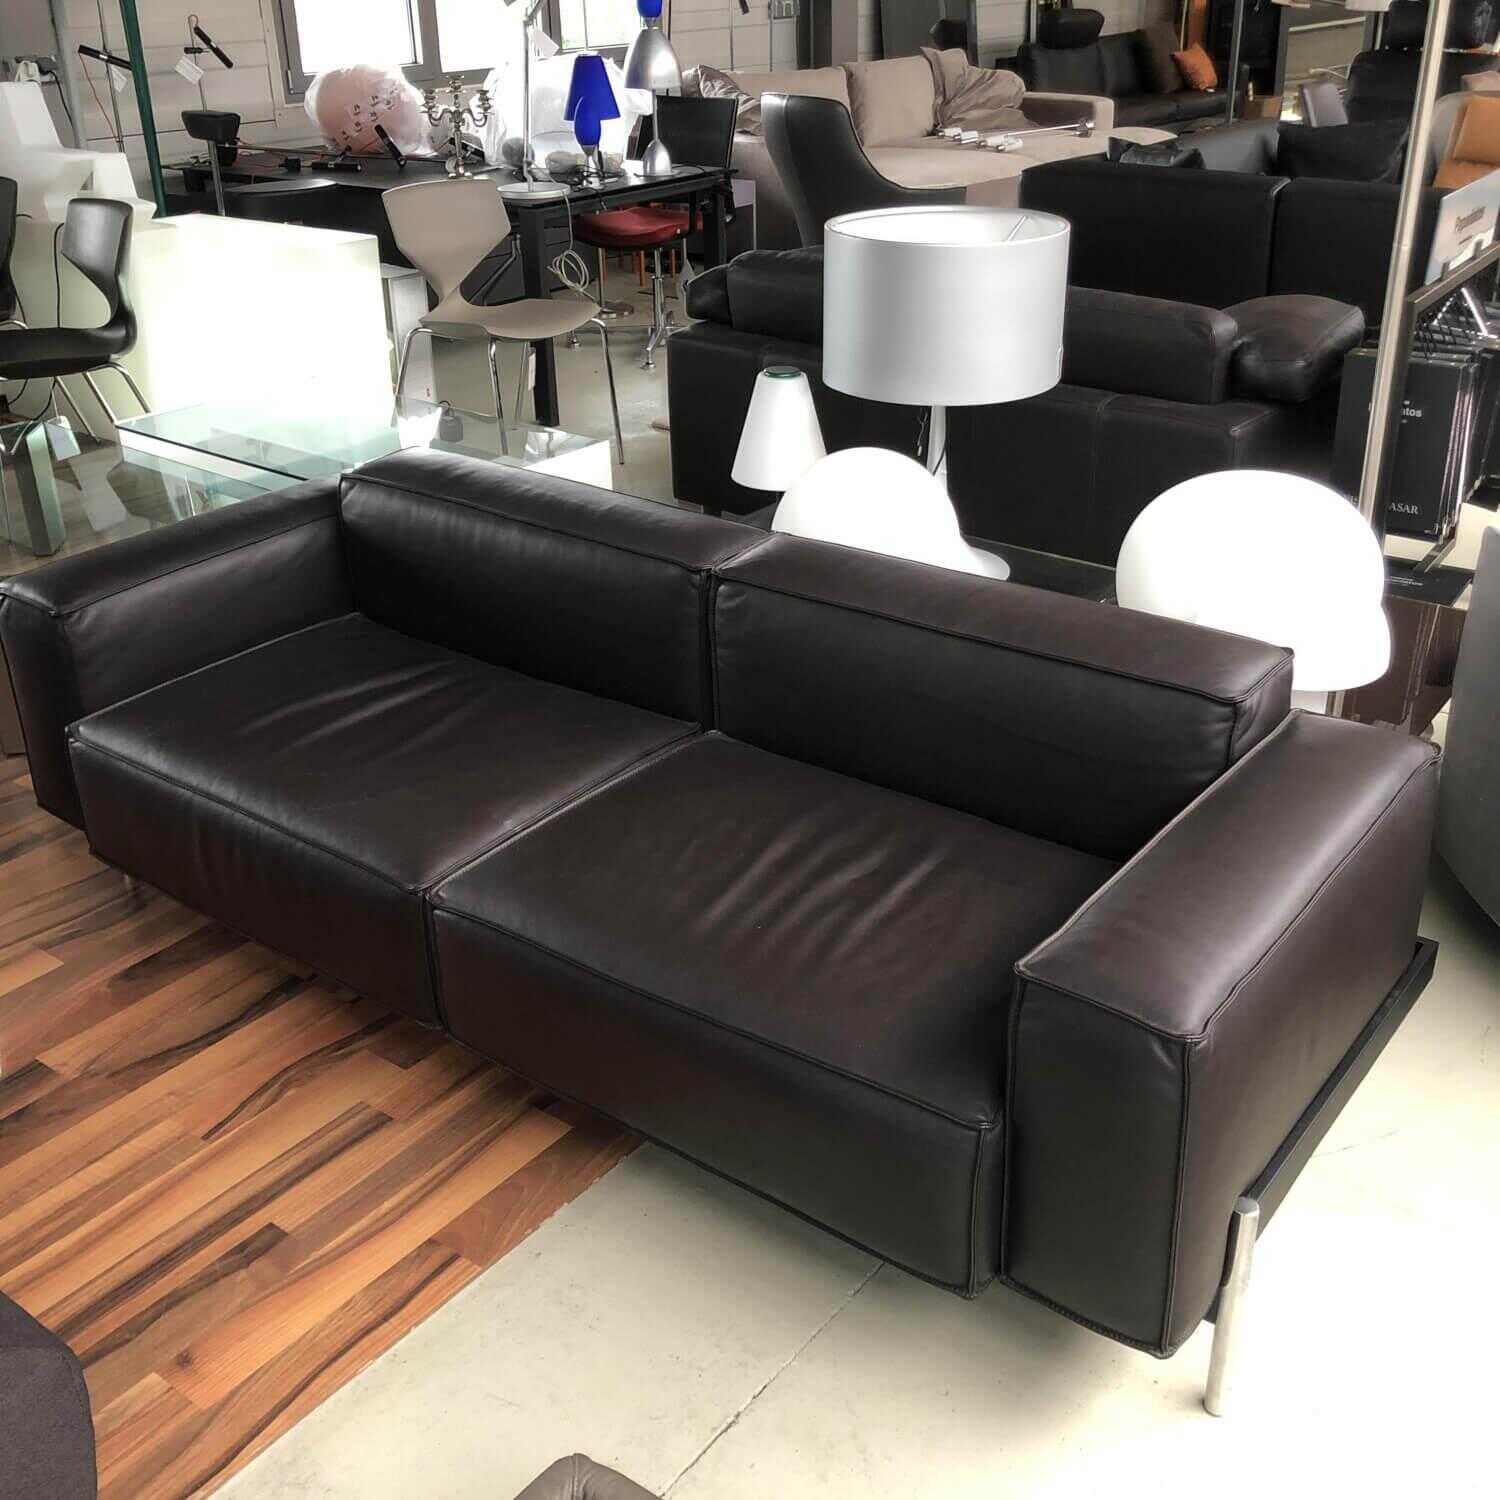 Sofa DS 0022/323 Leder Touch Espresso Gestell Metall